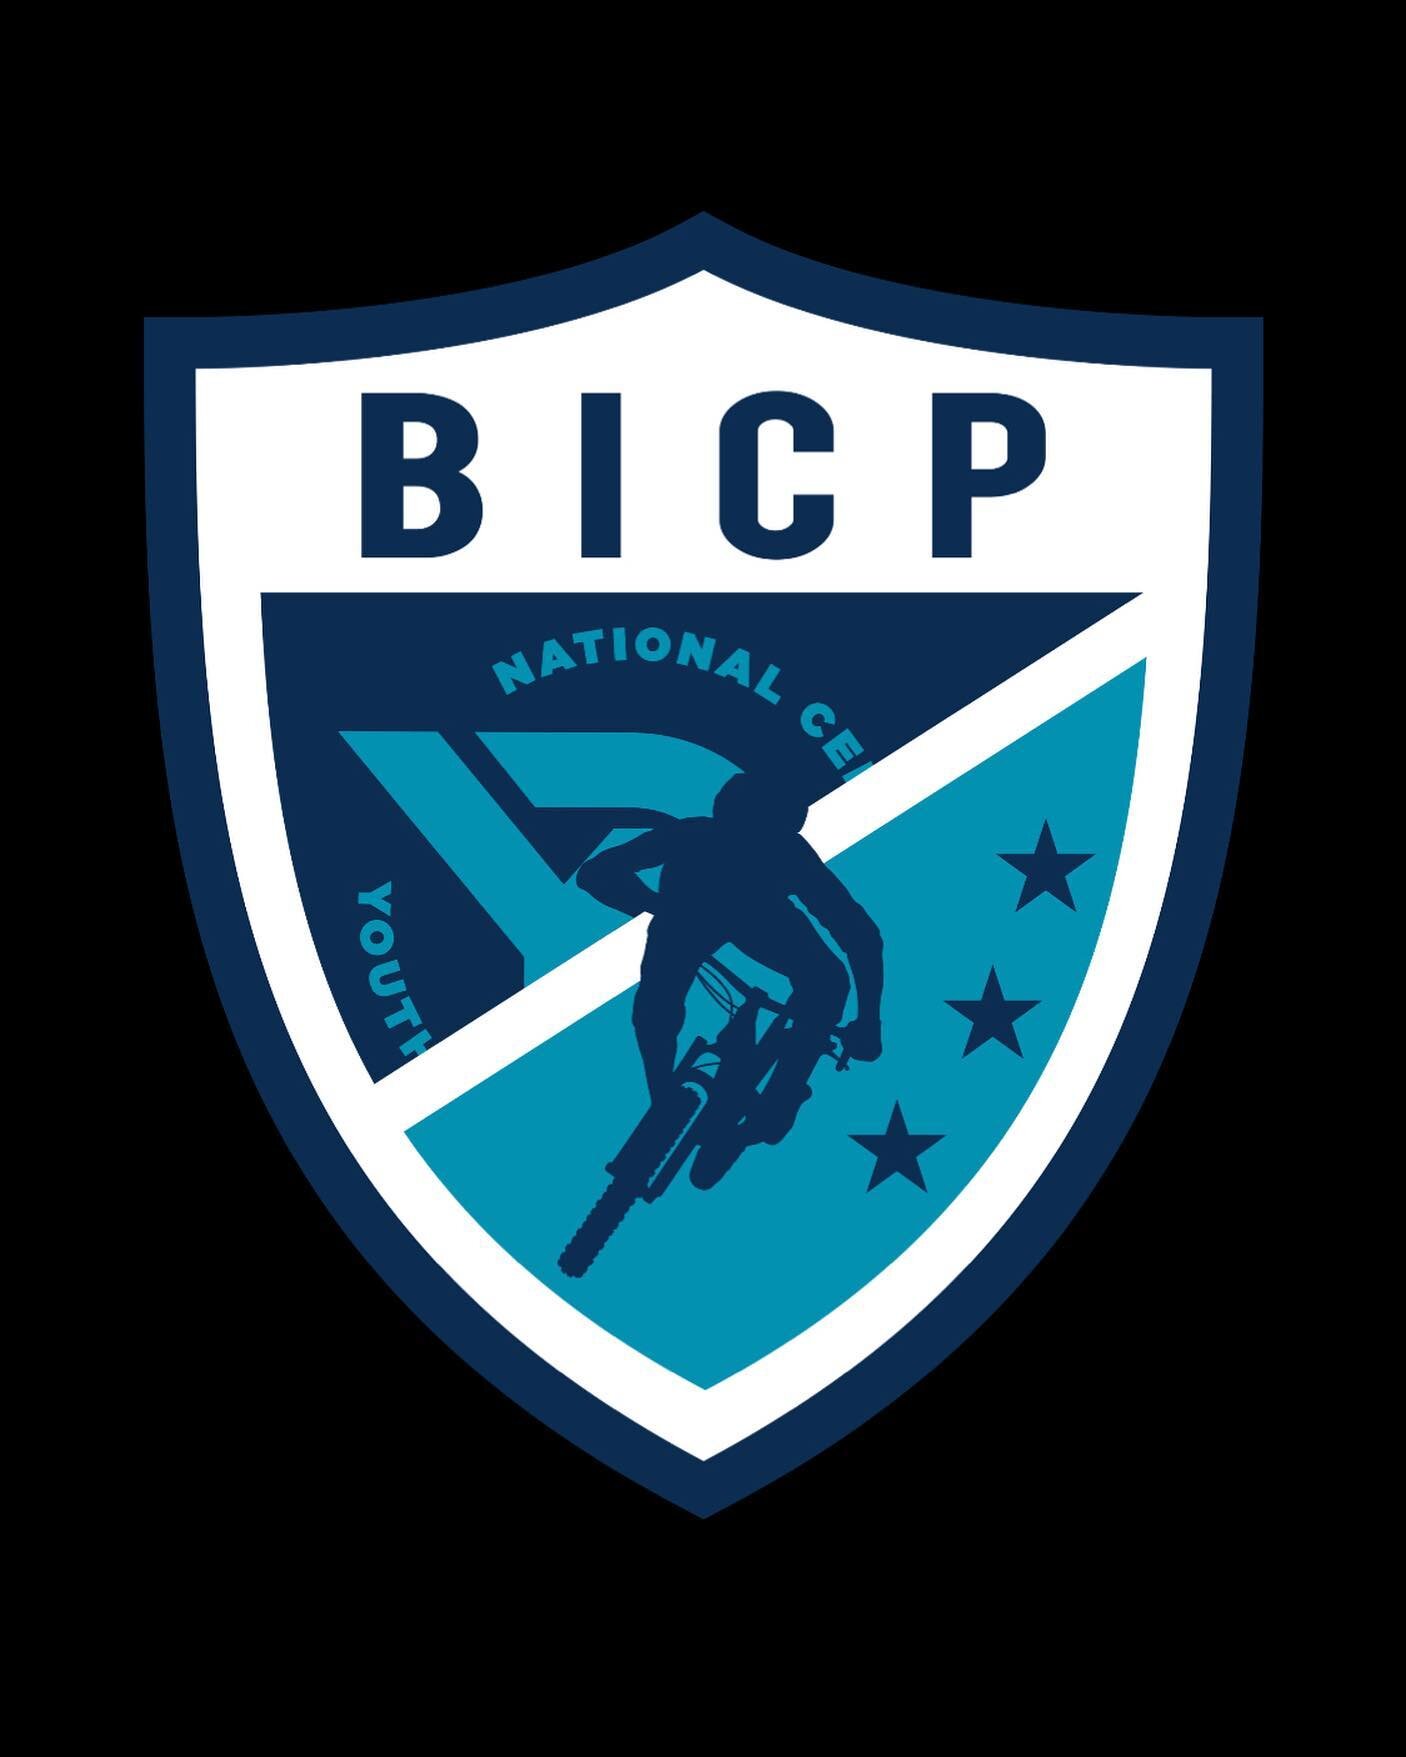 It&rsquo;s December, and time to announce our second featured partner in our &quot;Common Thread&quot; campaign.

This month we are proud to feature The Bike Instructor Certification Program, or better known across the land as BICP.

BICP supports th